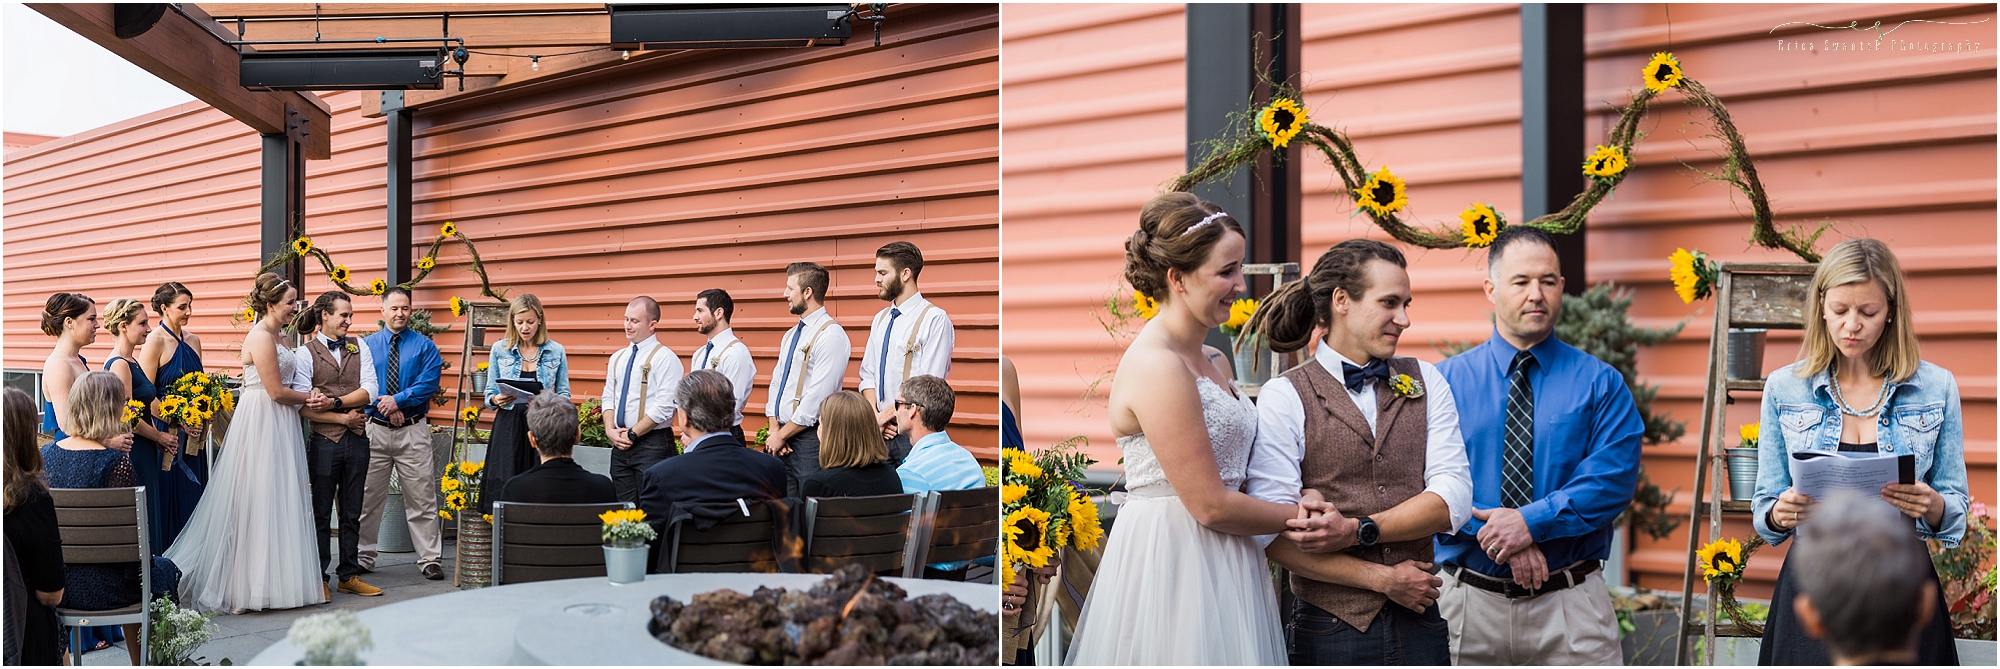 A family member reads a poem to the bride and groom during their Worthy Brewing Wedding in Bend Oregon. | Erica Swantek Photography